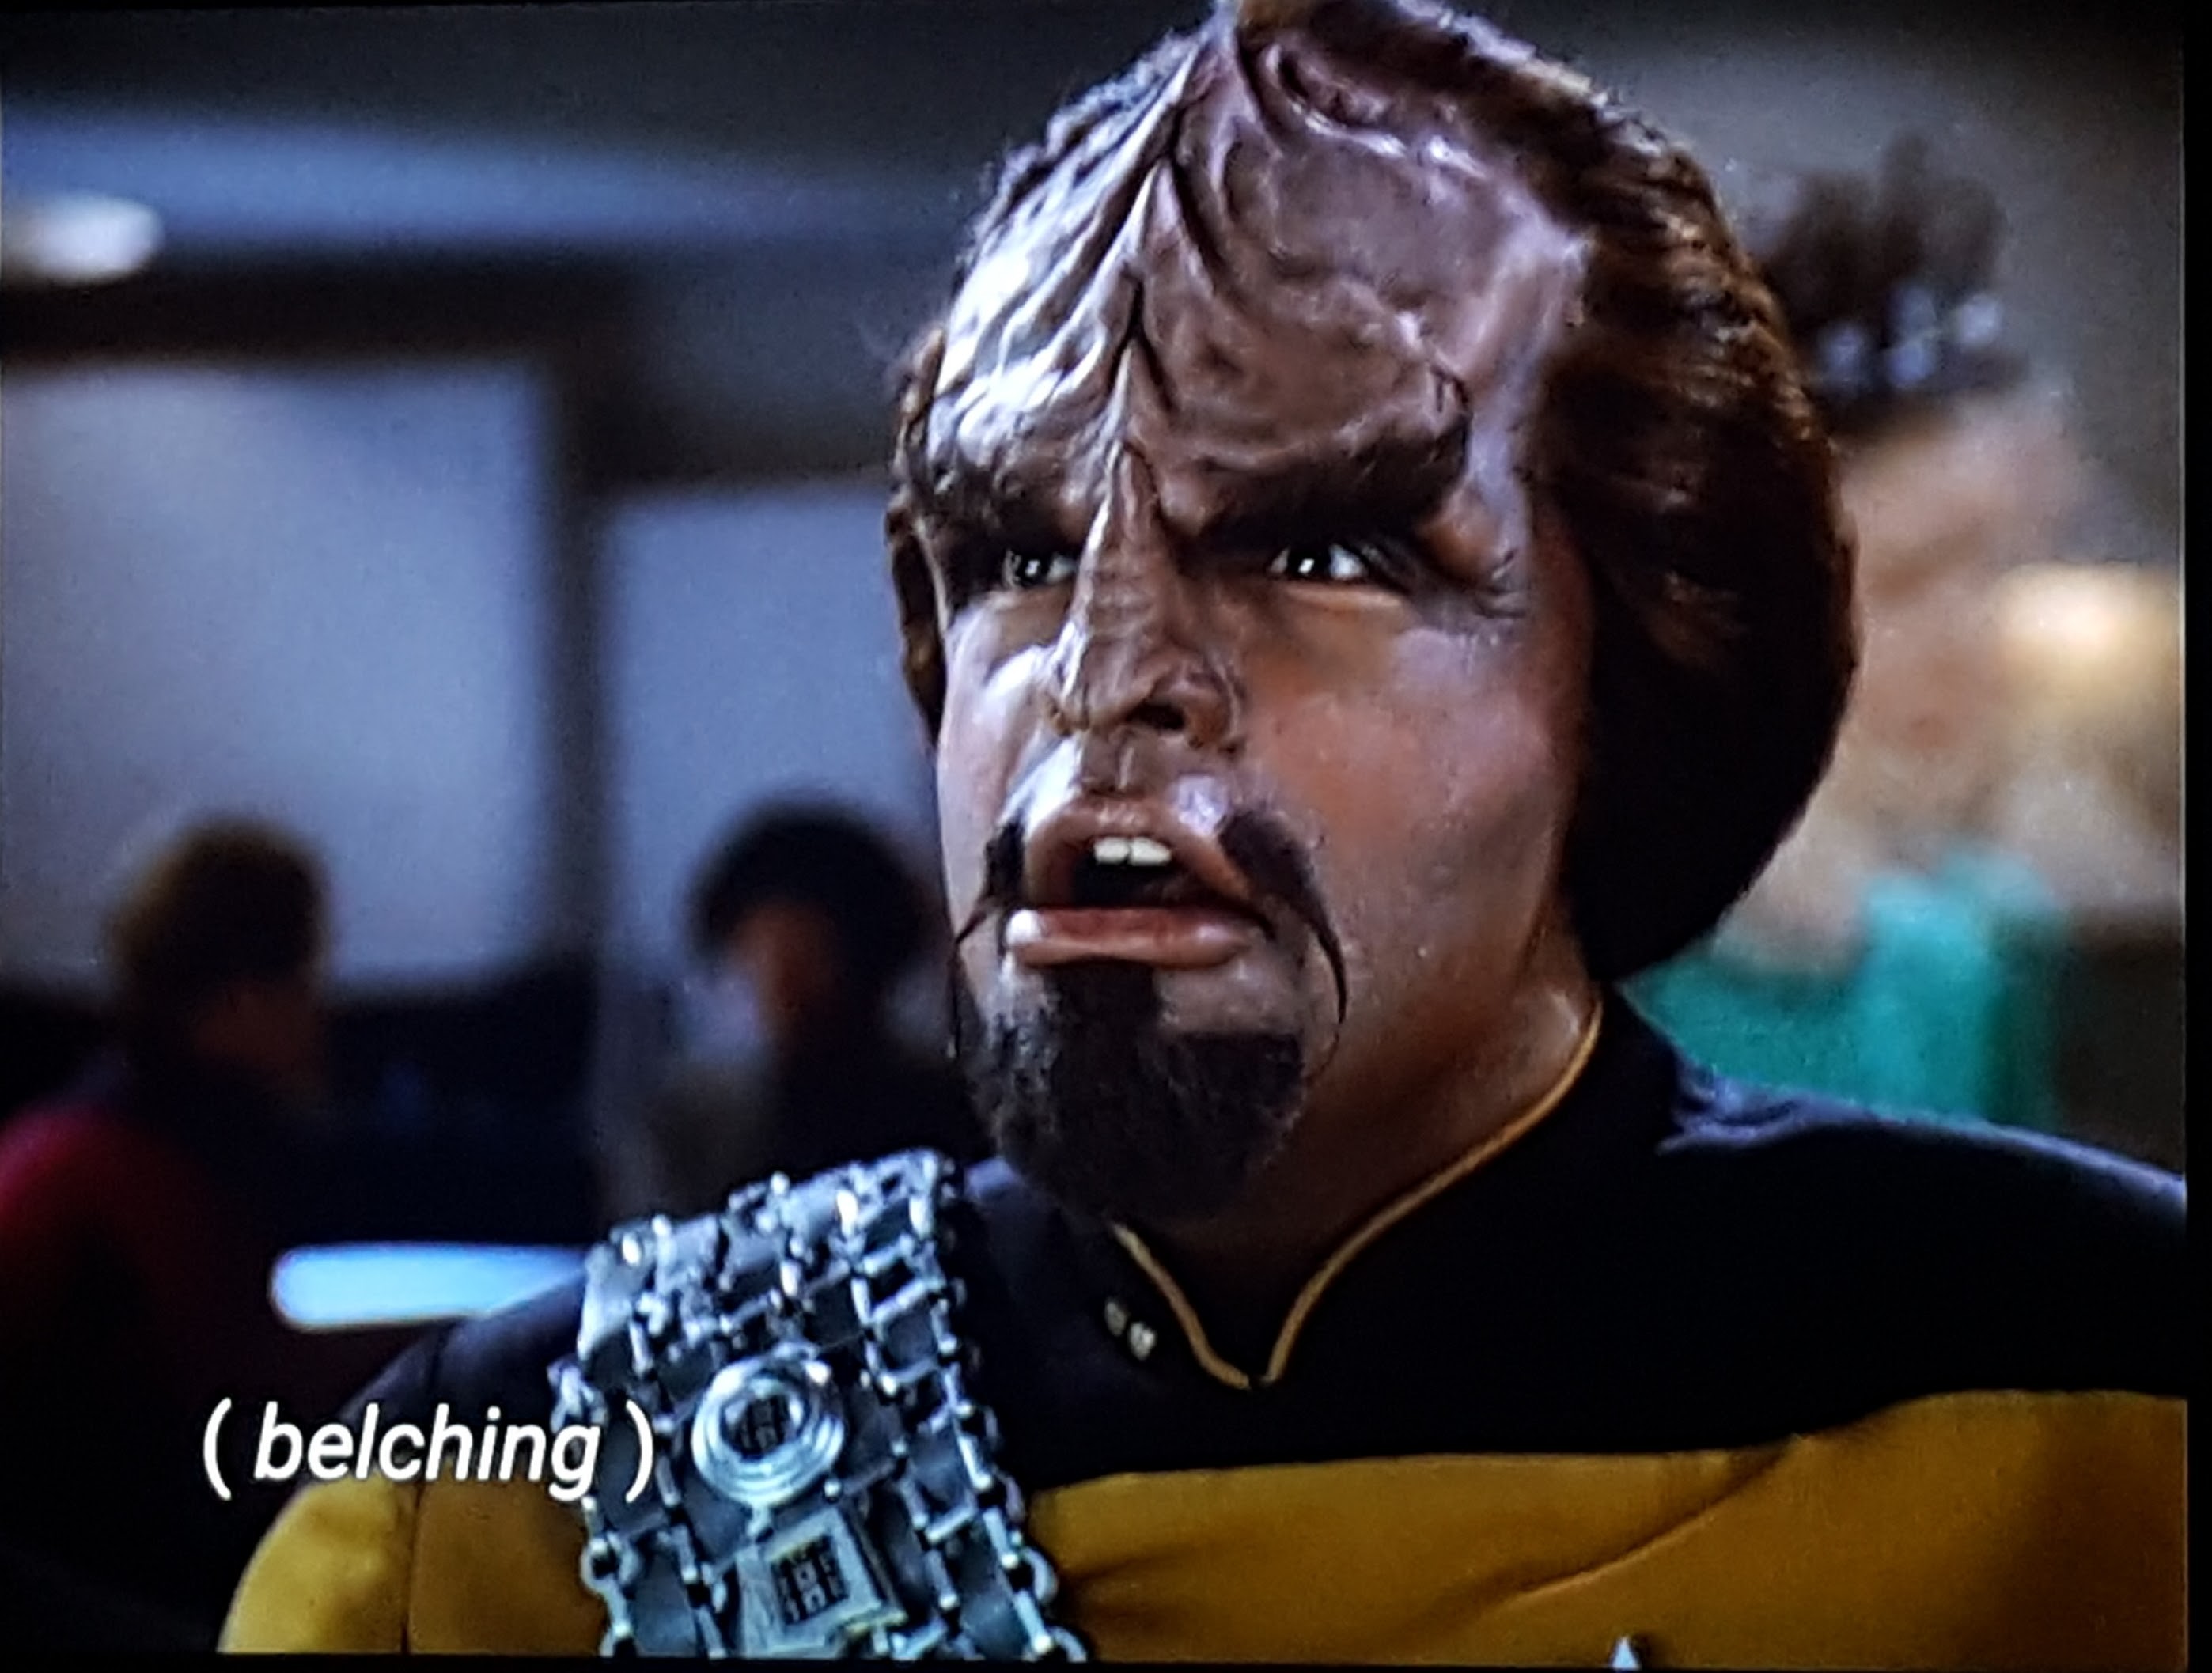 Worf is in Ten Forward, and he's belching. Closed caption reads: (belching)